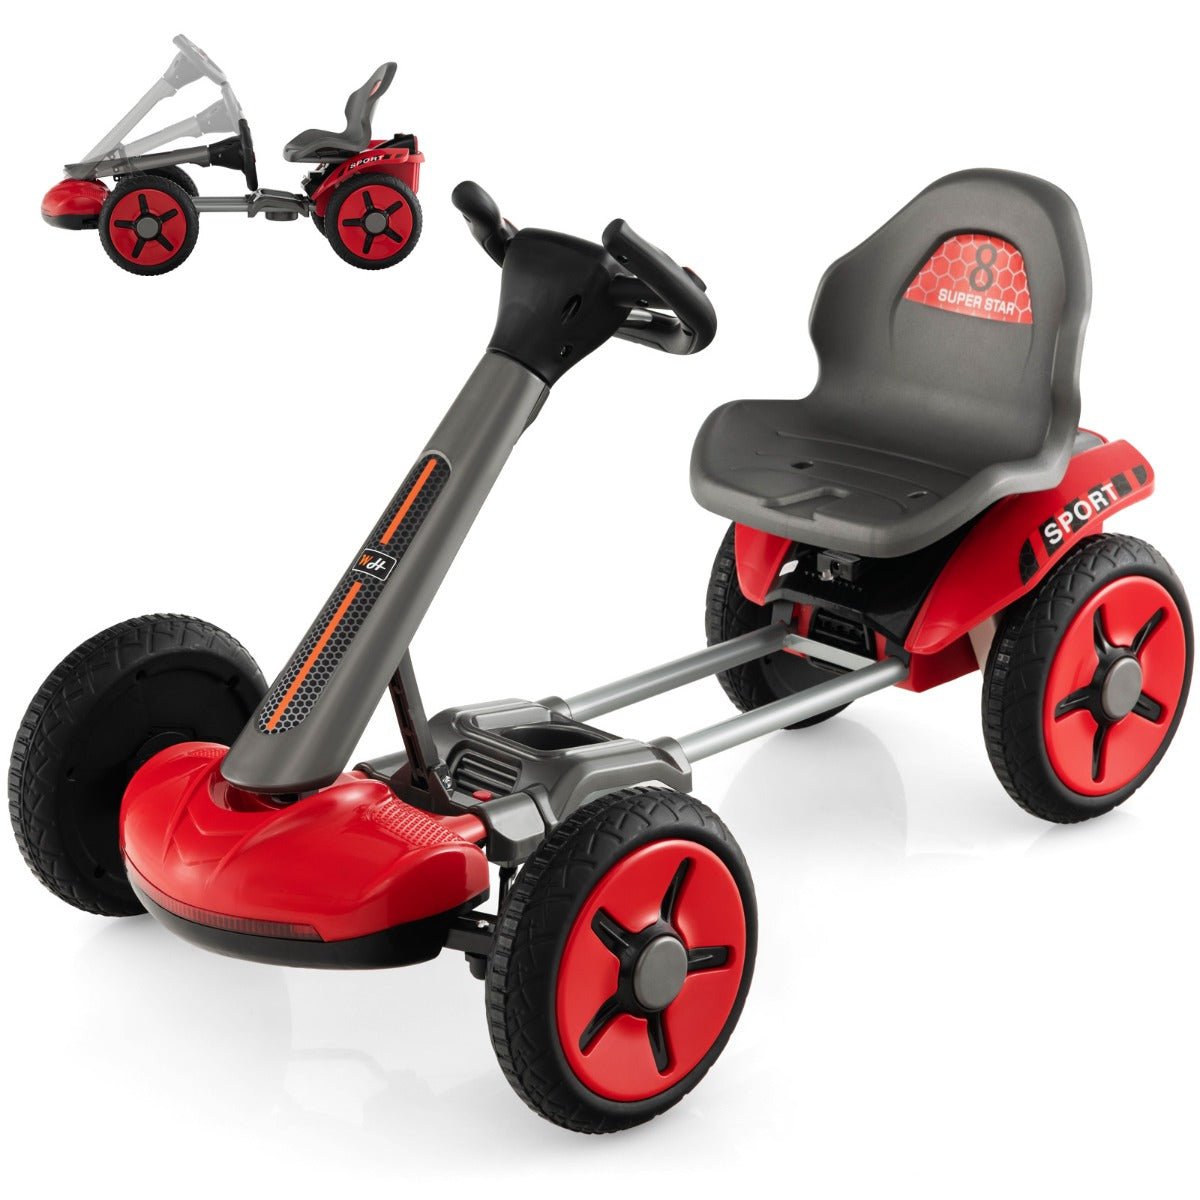 Red electric go kart